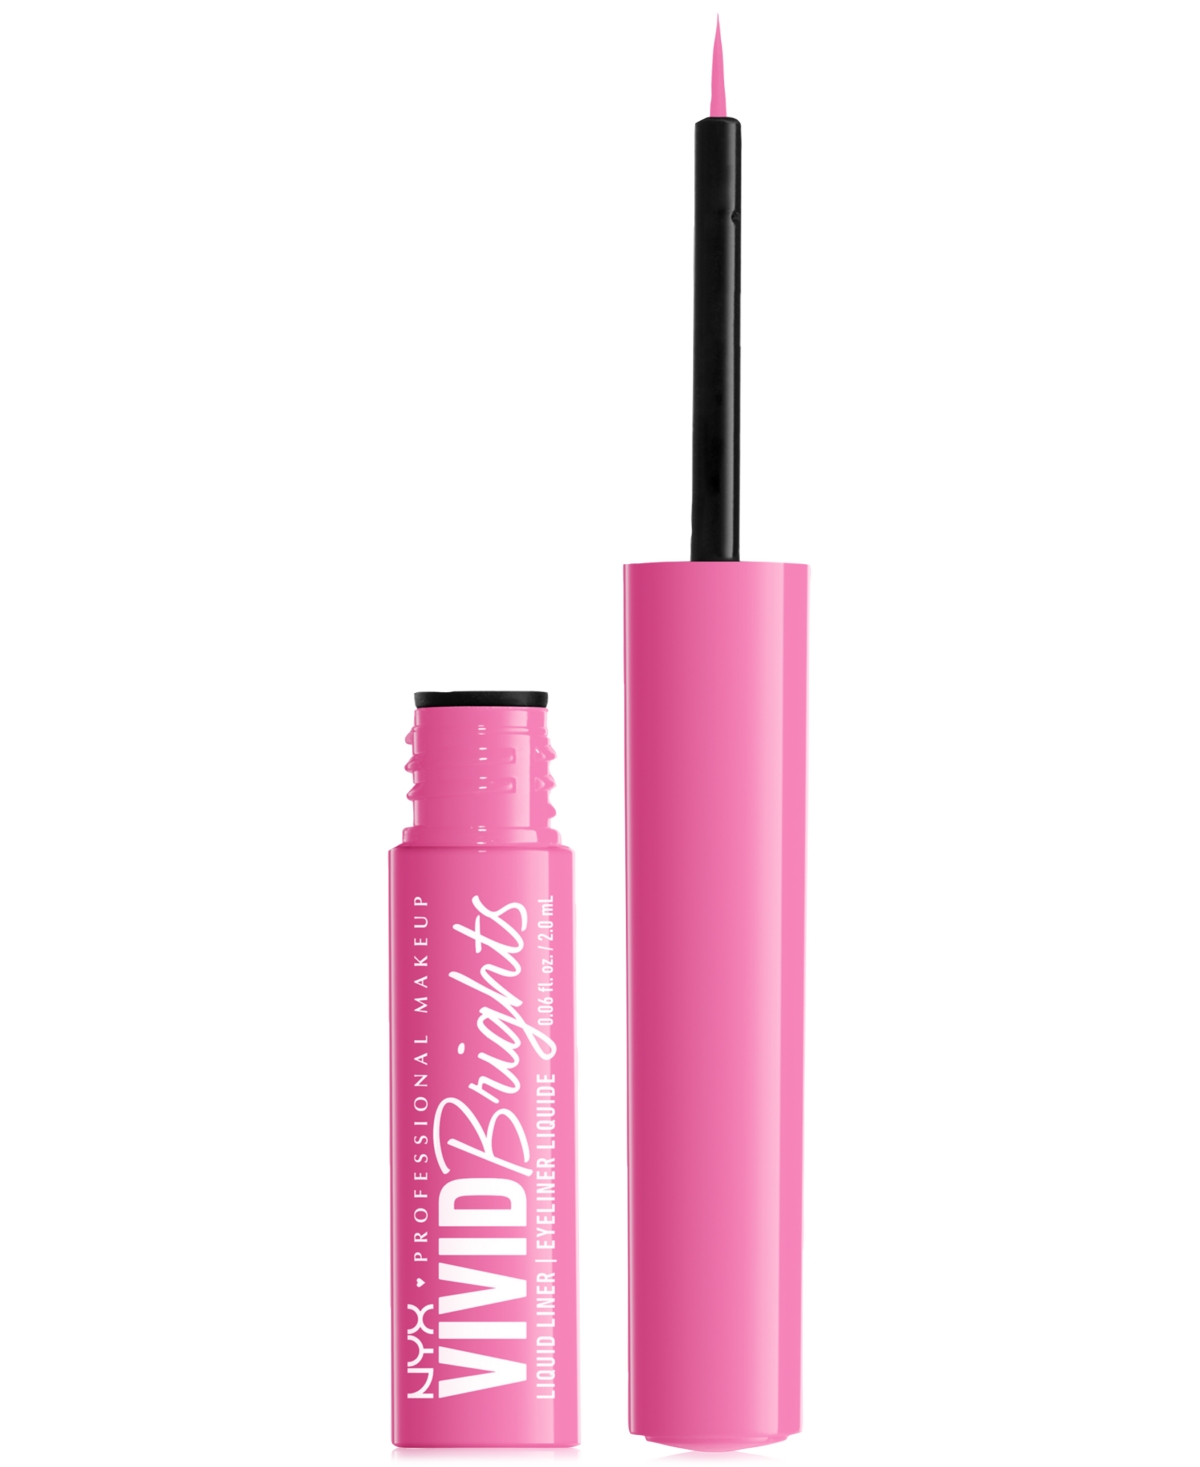 Nyx Professional Makeup Vivid Brights Liquid Liner In Dont Pink Twice